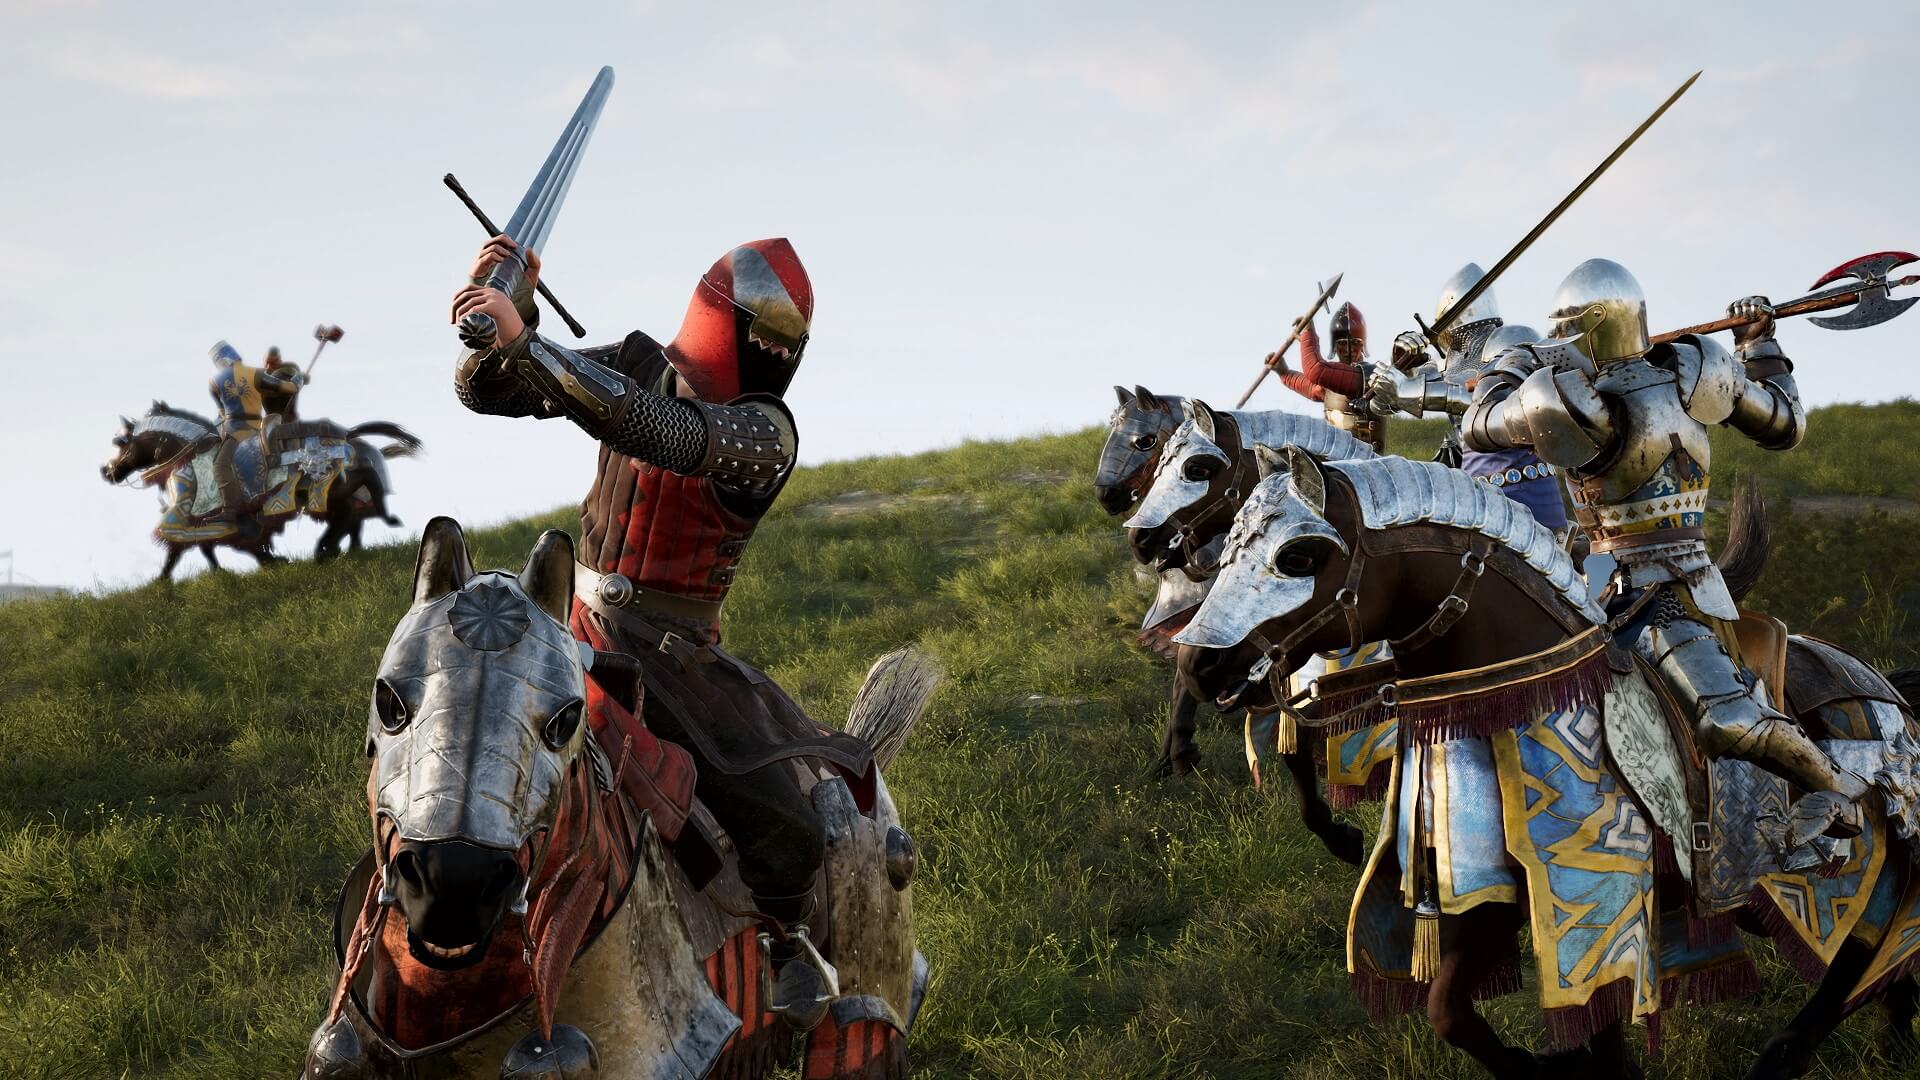 This Chivalry 2 game pass screenshot shows off mounted knights preparing to beat the stuffing out of each other.